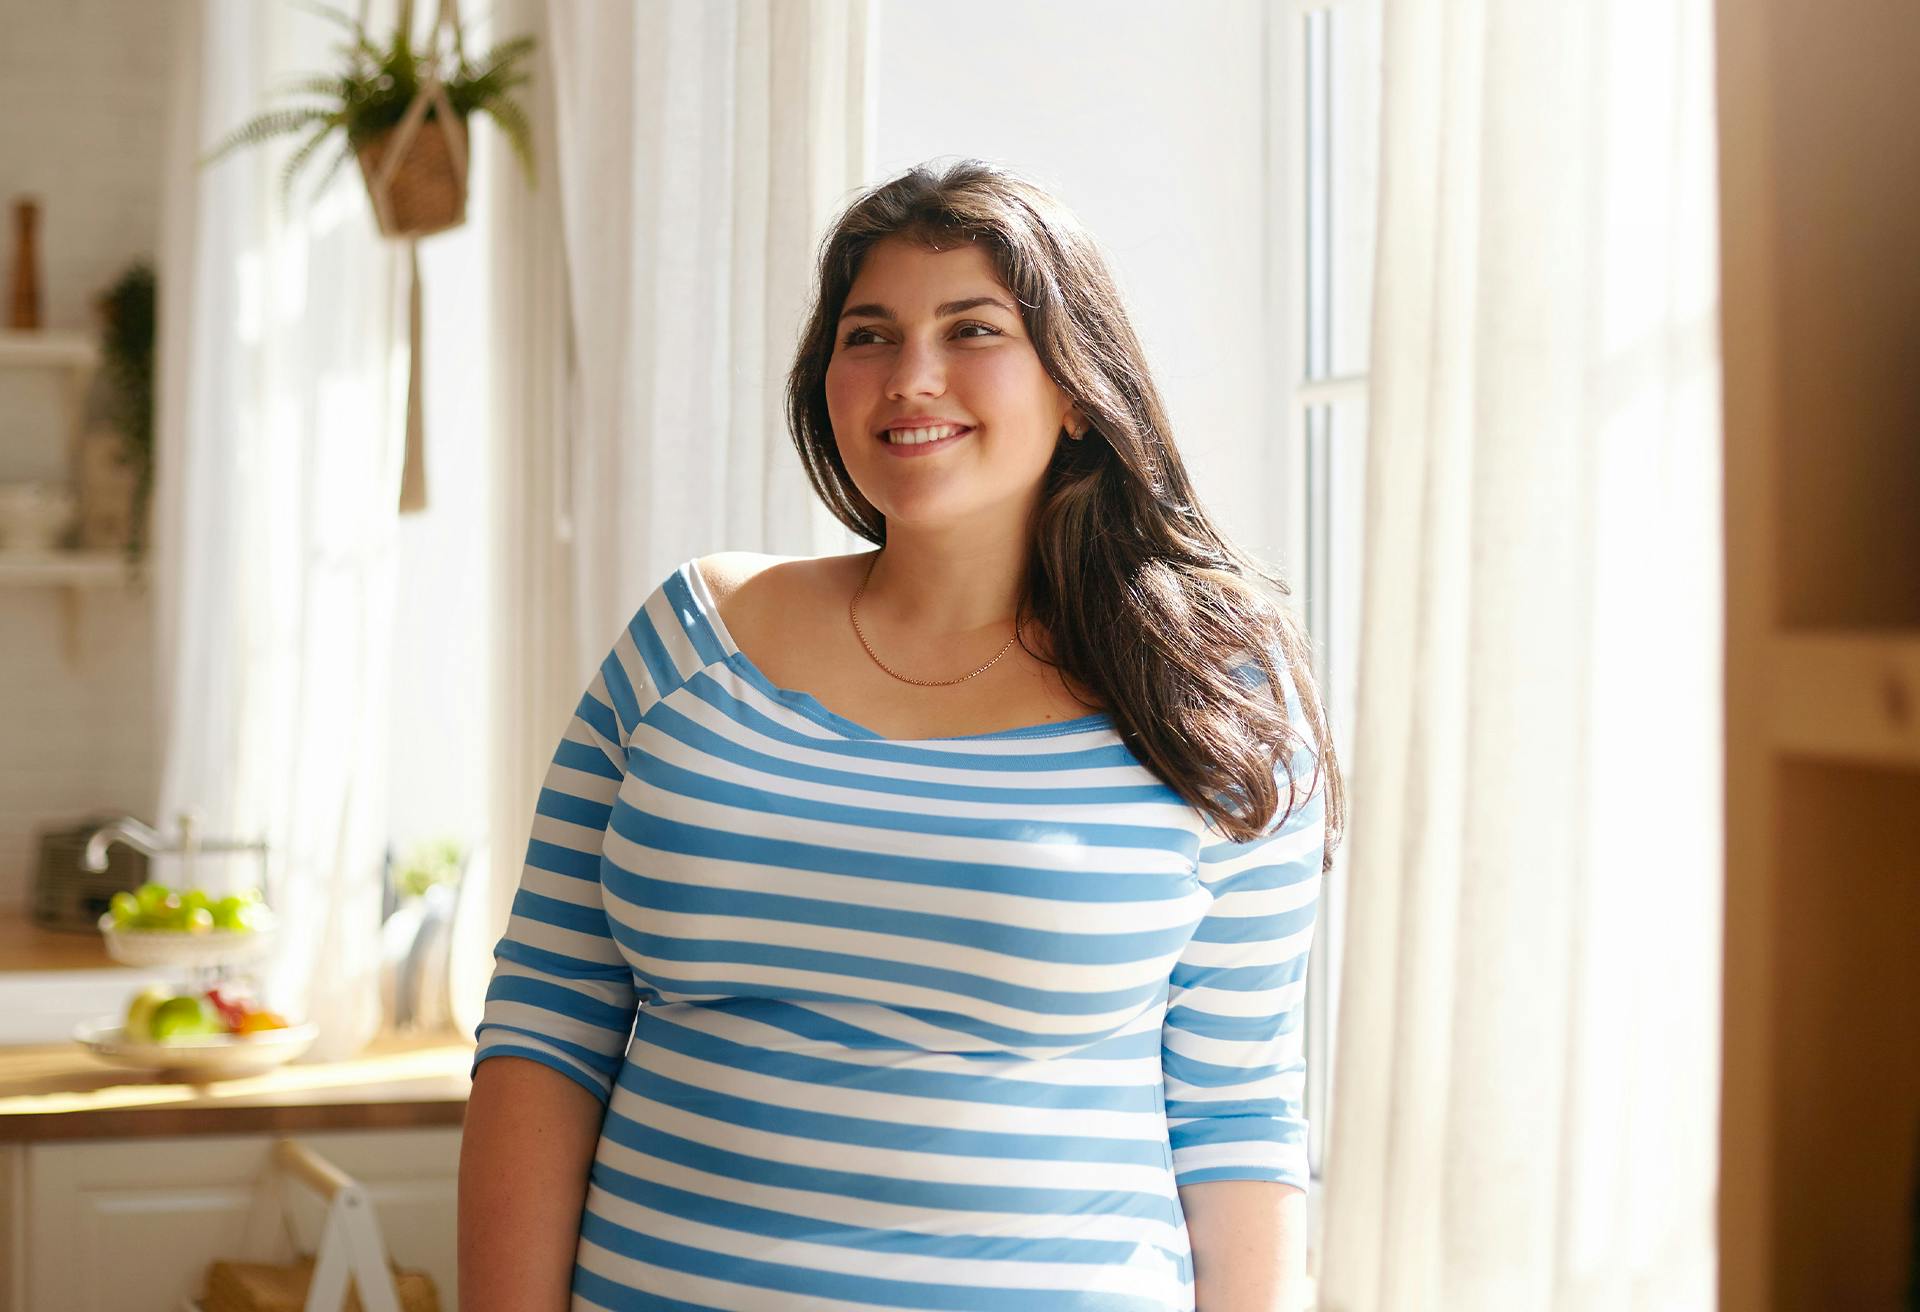 Woman in a blue striped shirt, smiling